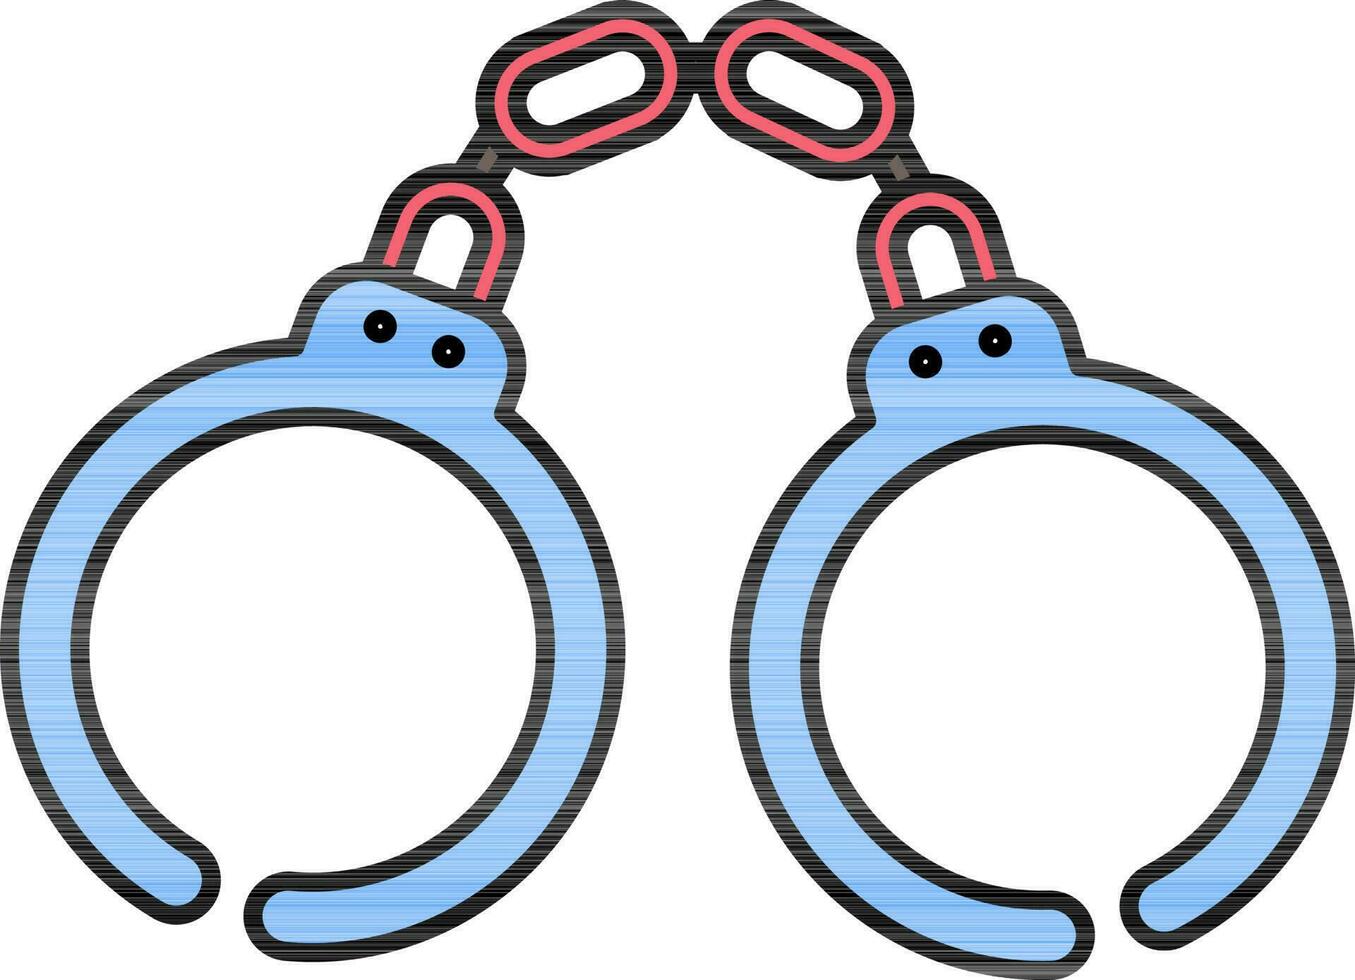 Handcuffs icon in blue and red color. vector